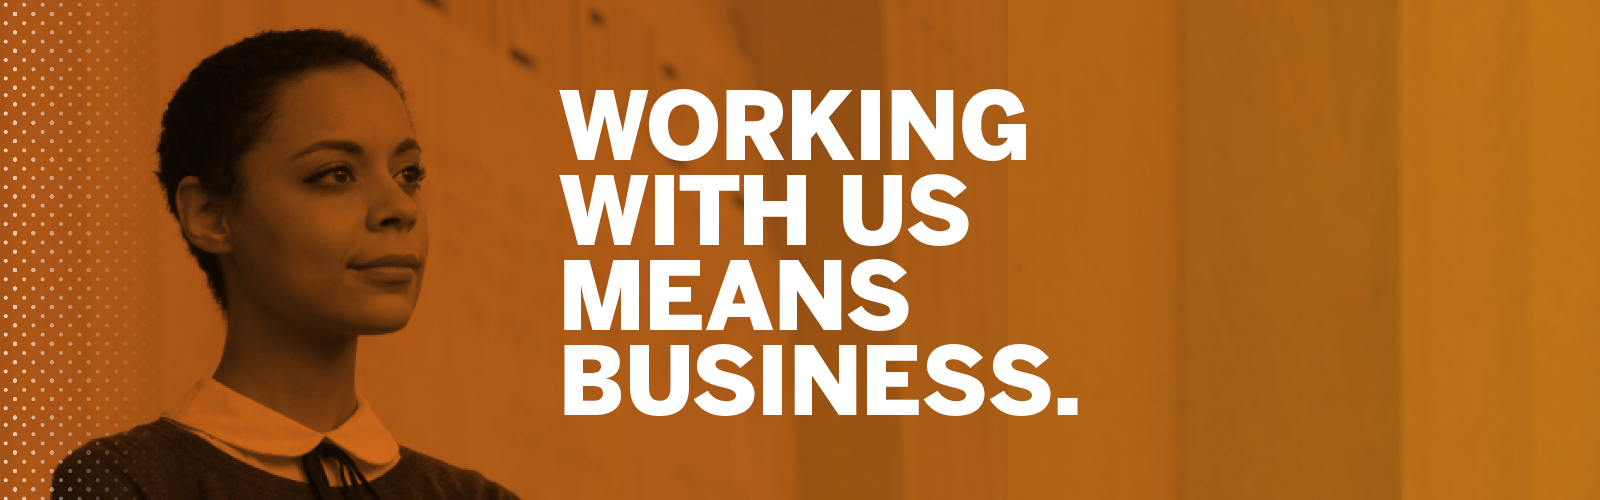 HUB and Small Business slogan graphic